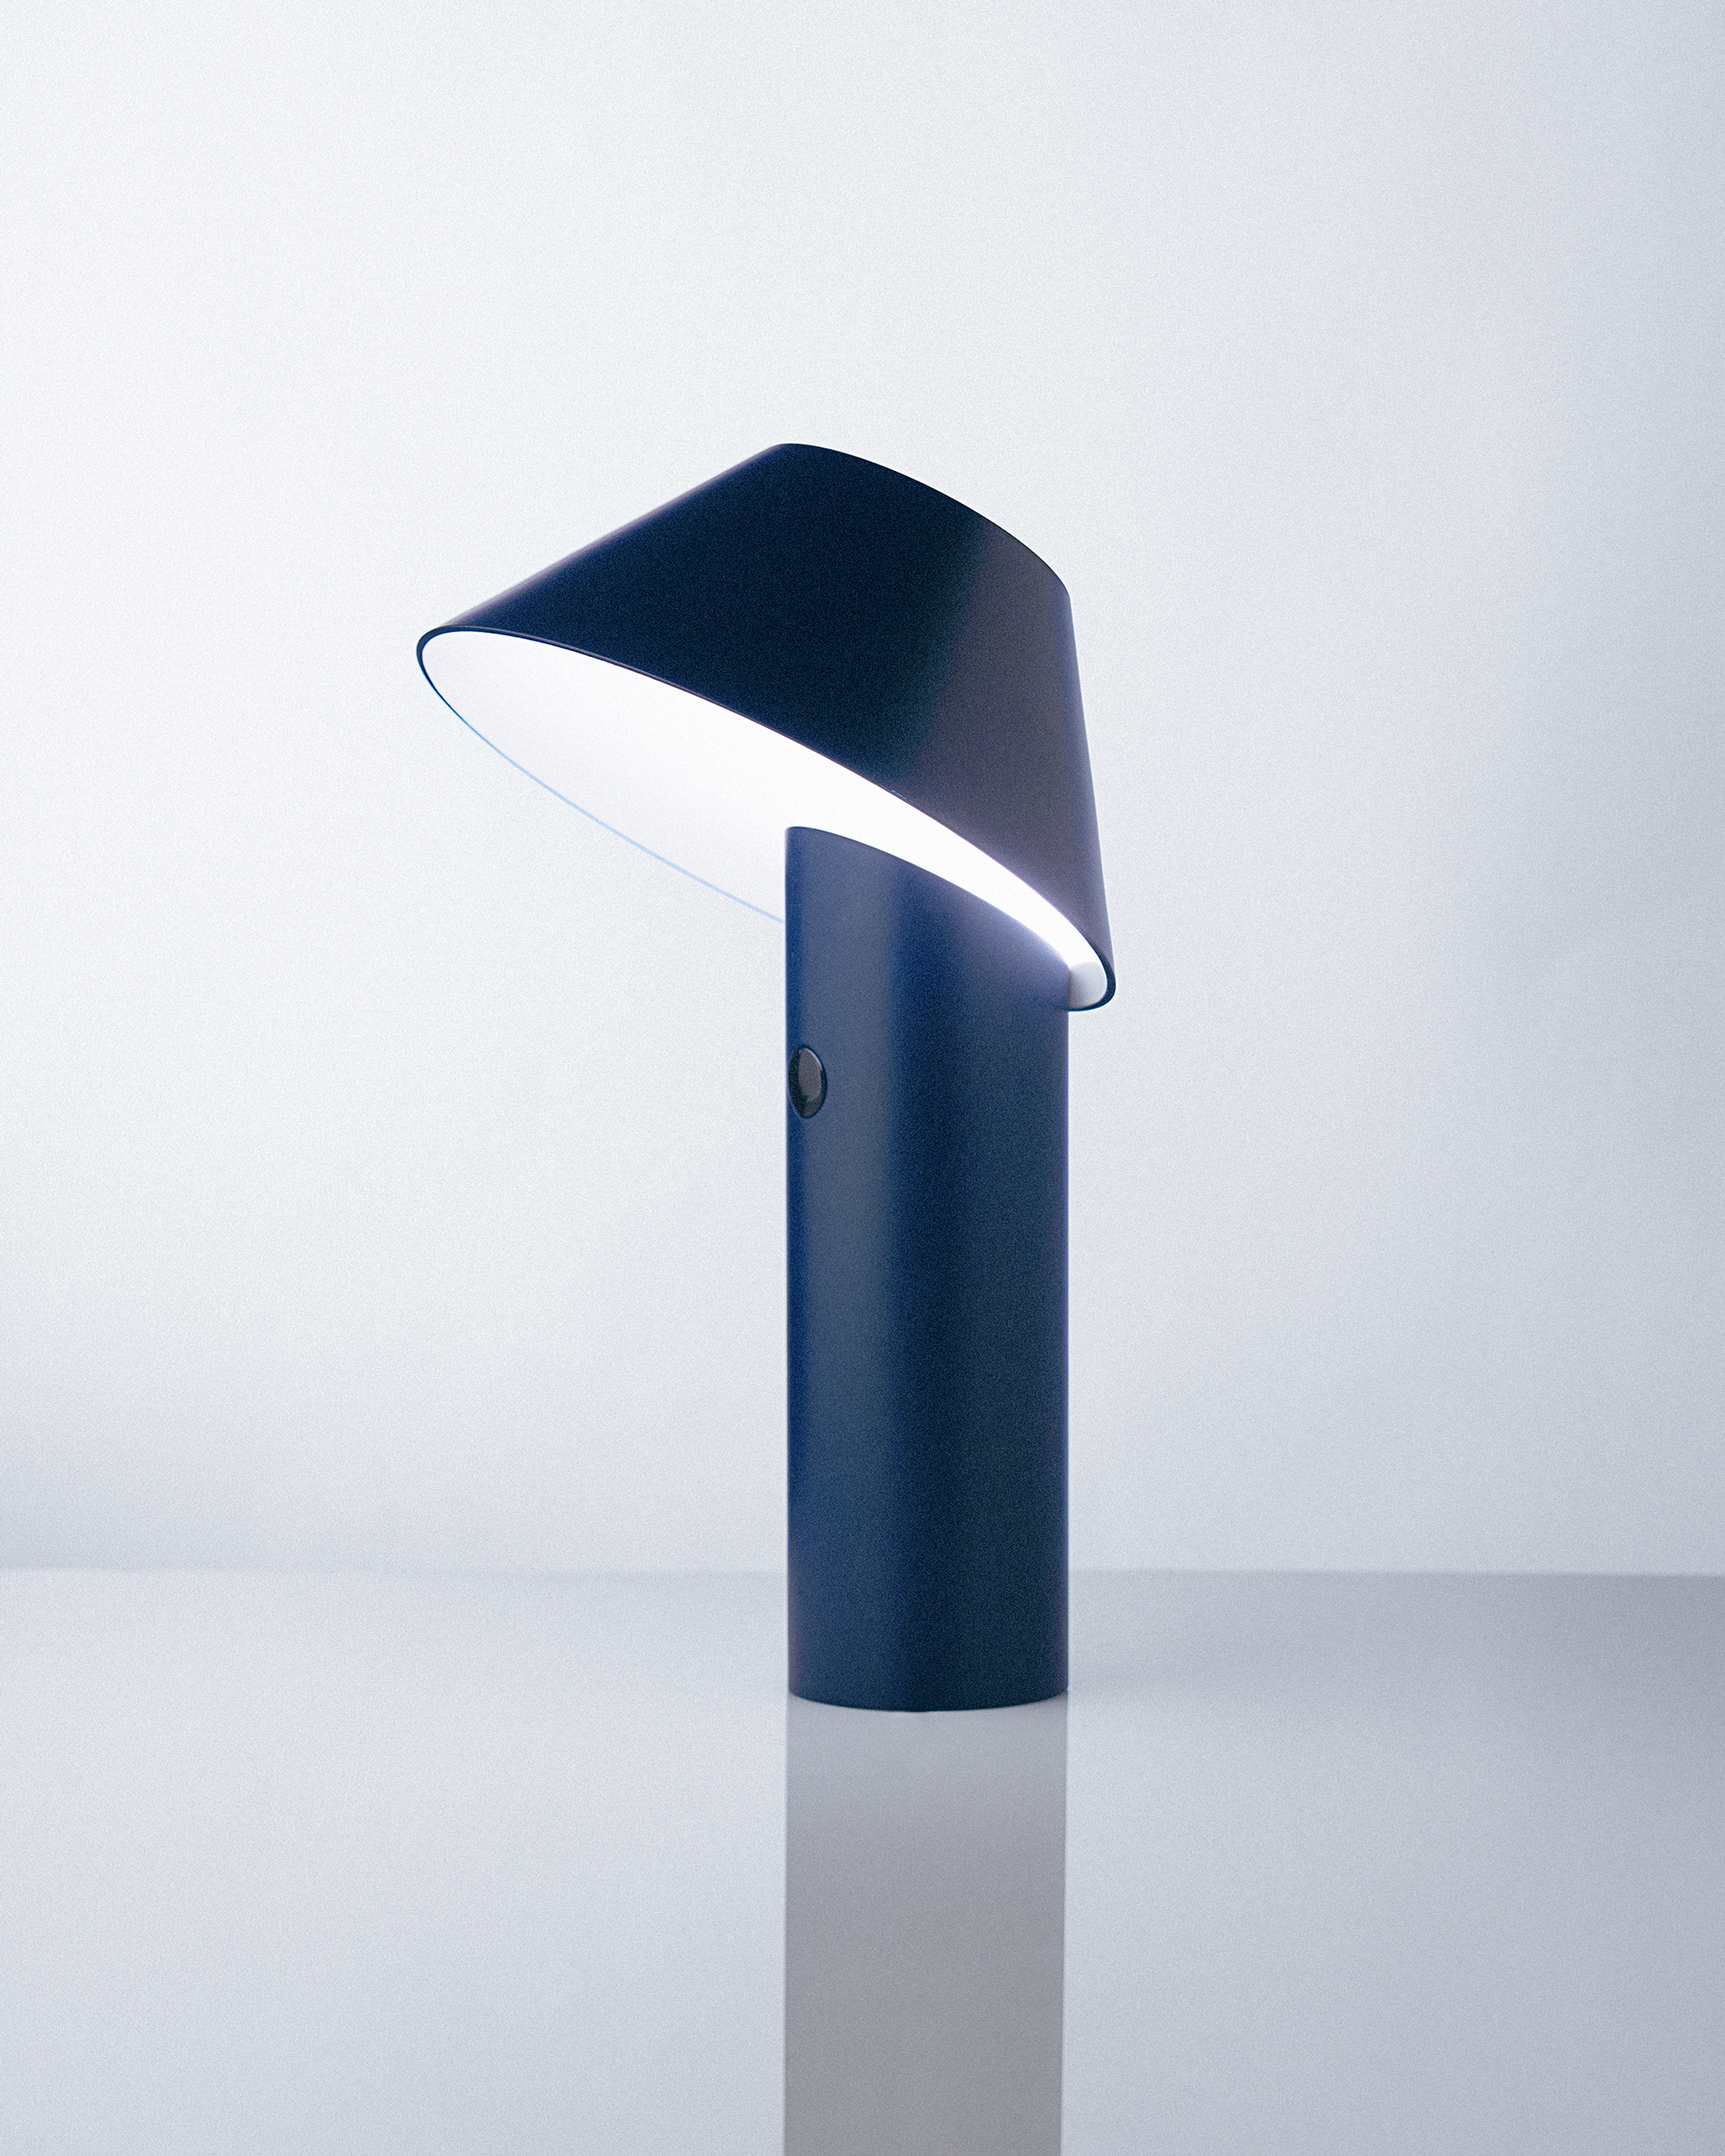 ECAL and Schätti Unveil Innovative Portable Lamp Collection at Milan Design Week - Gessato